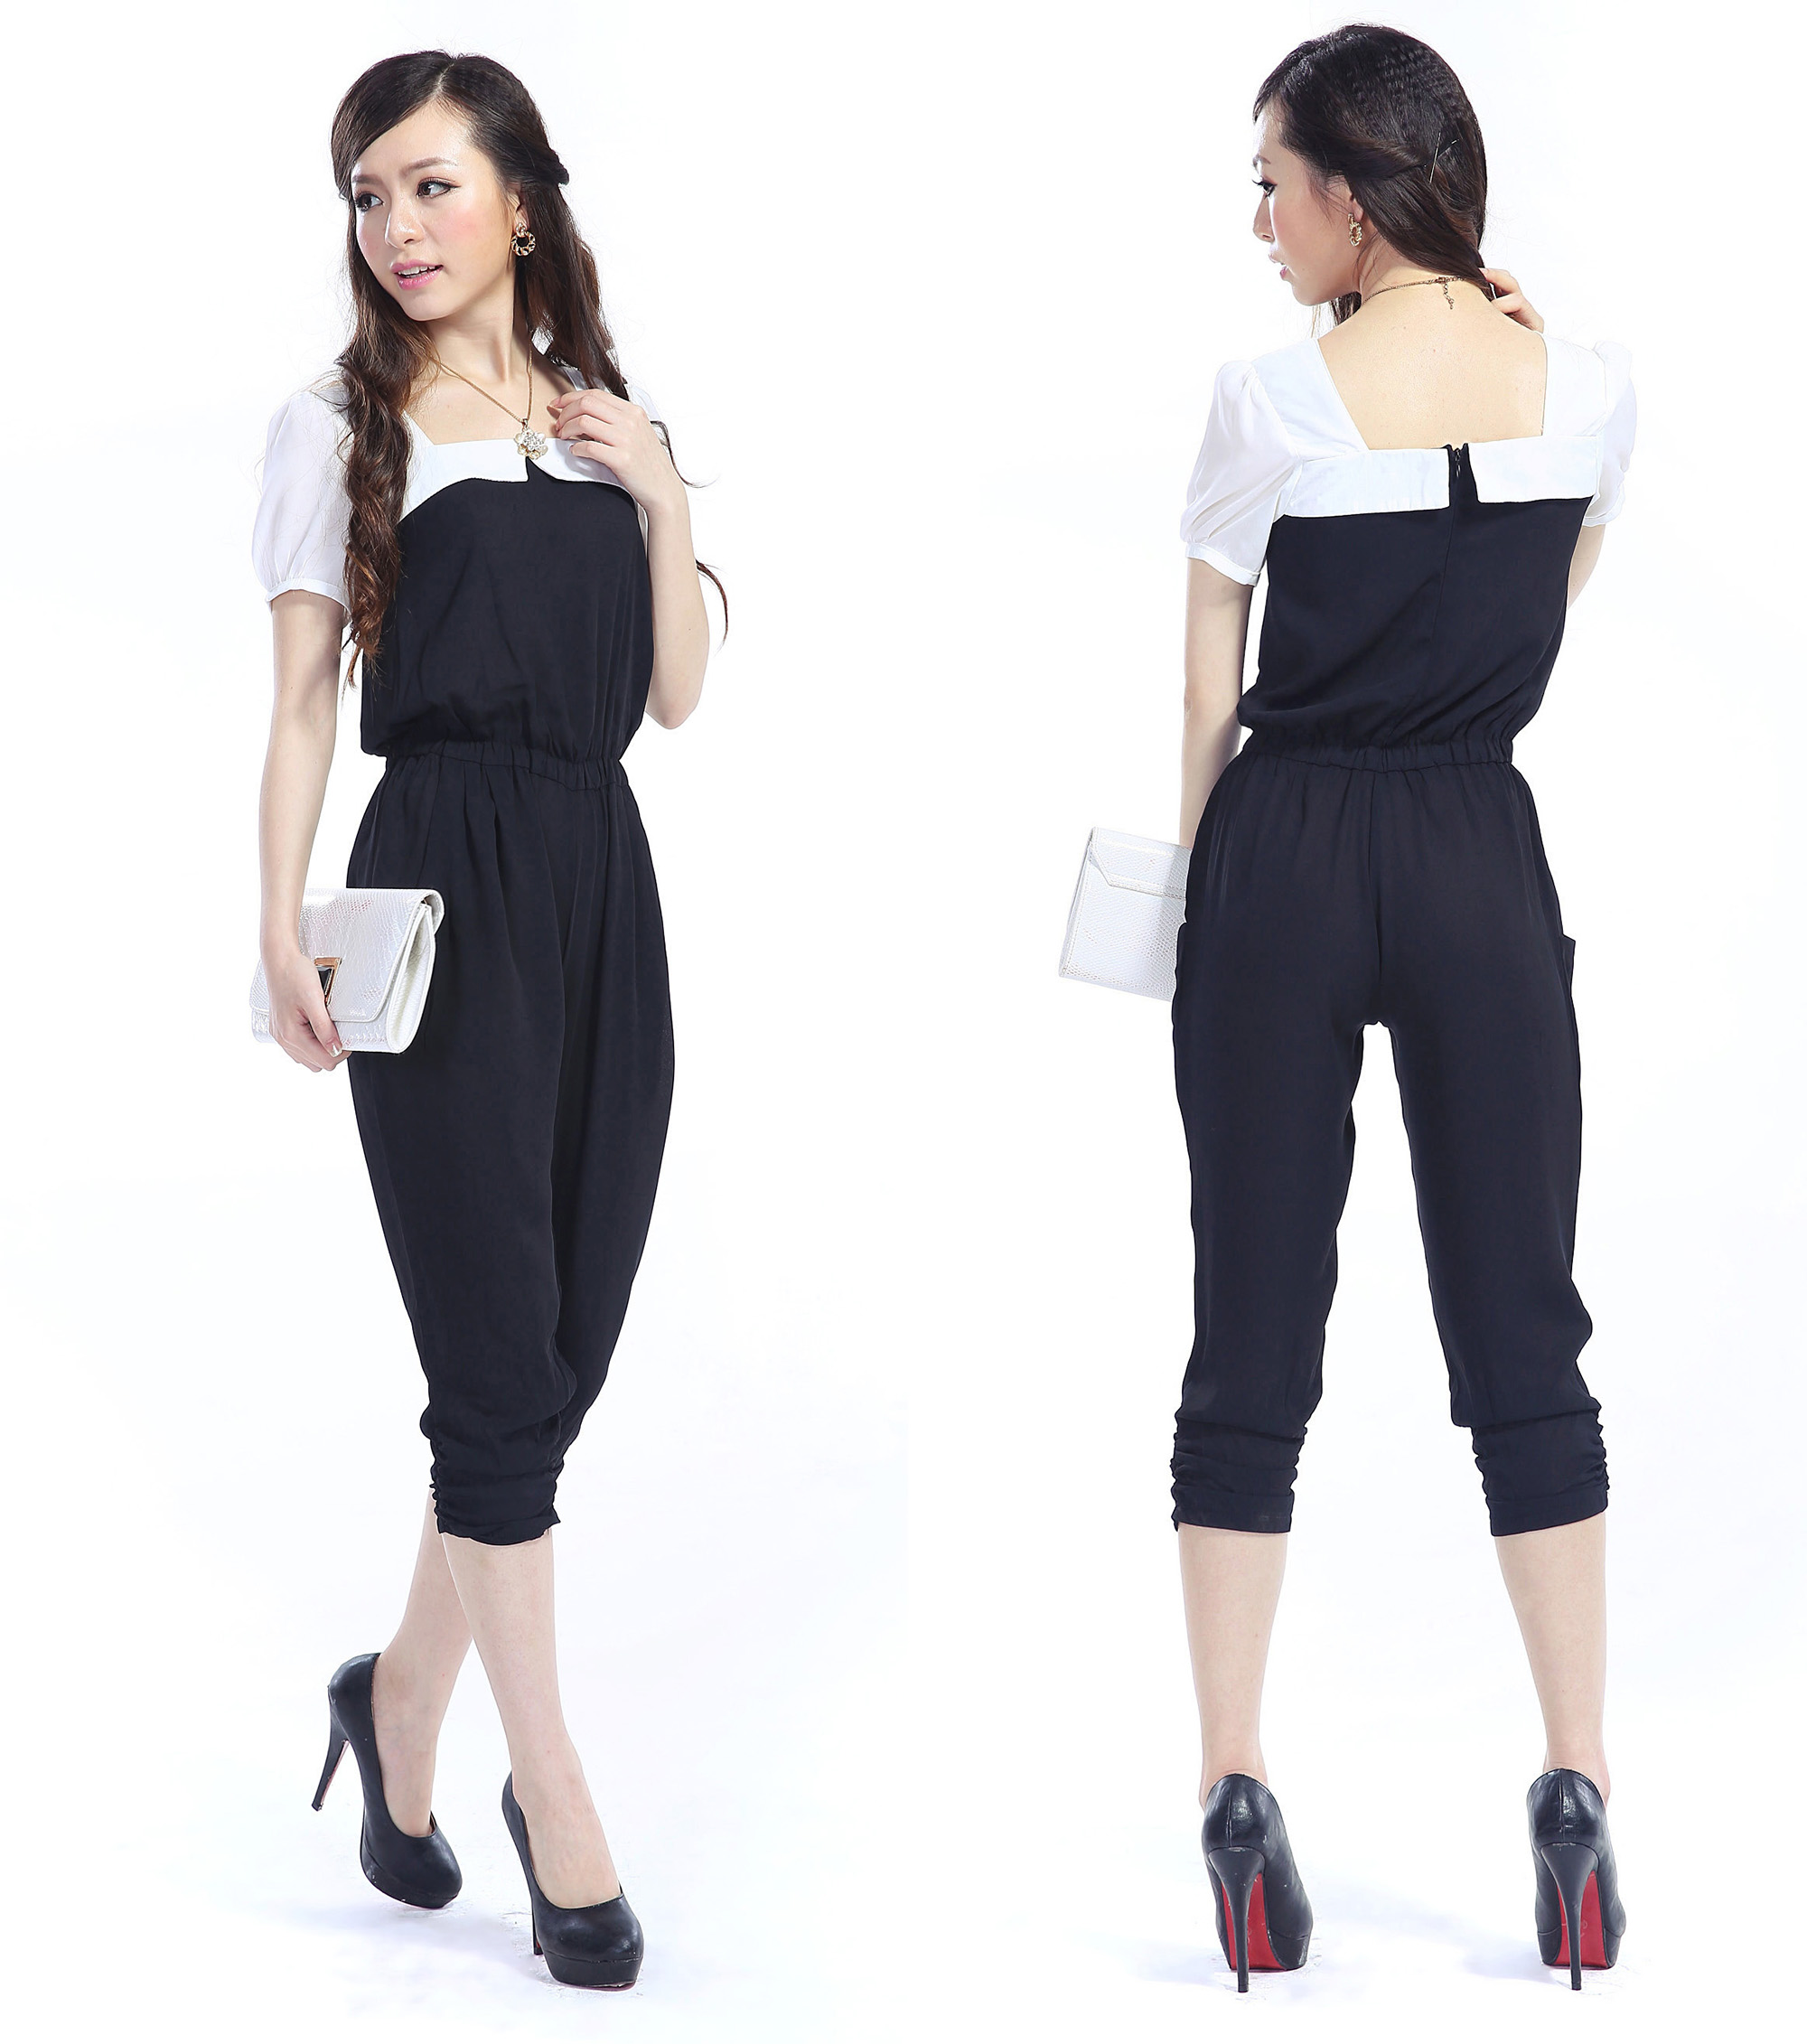 Summer-2013-Fashion-Women-Jumpsuit-Short-sleeve-Overall-Casual-Jumpsuits-Women-Black-Pants-Rompers-black-White.jpg